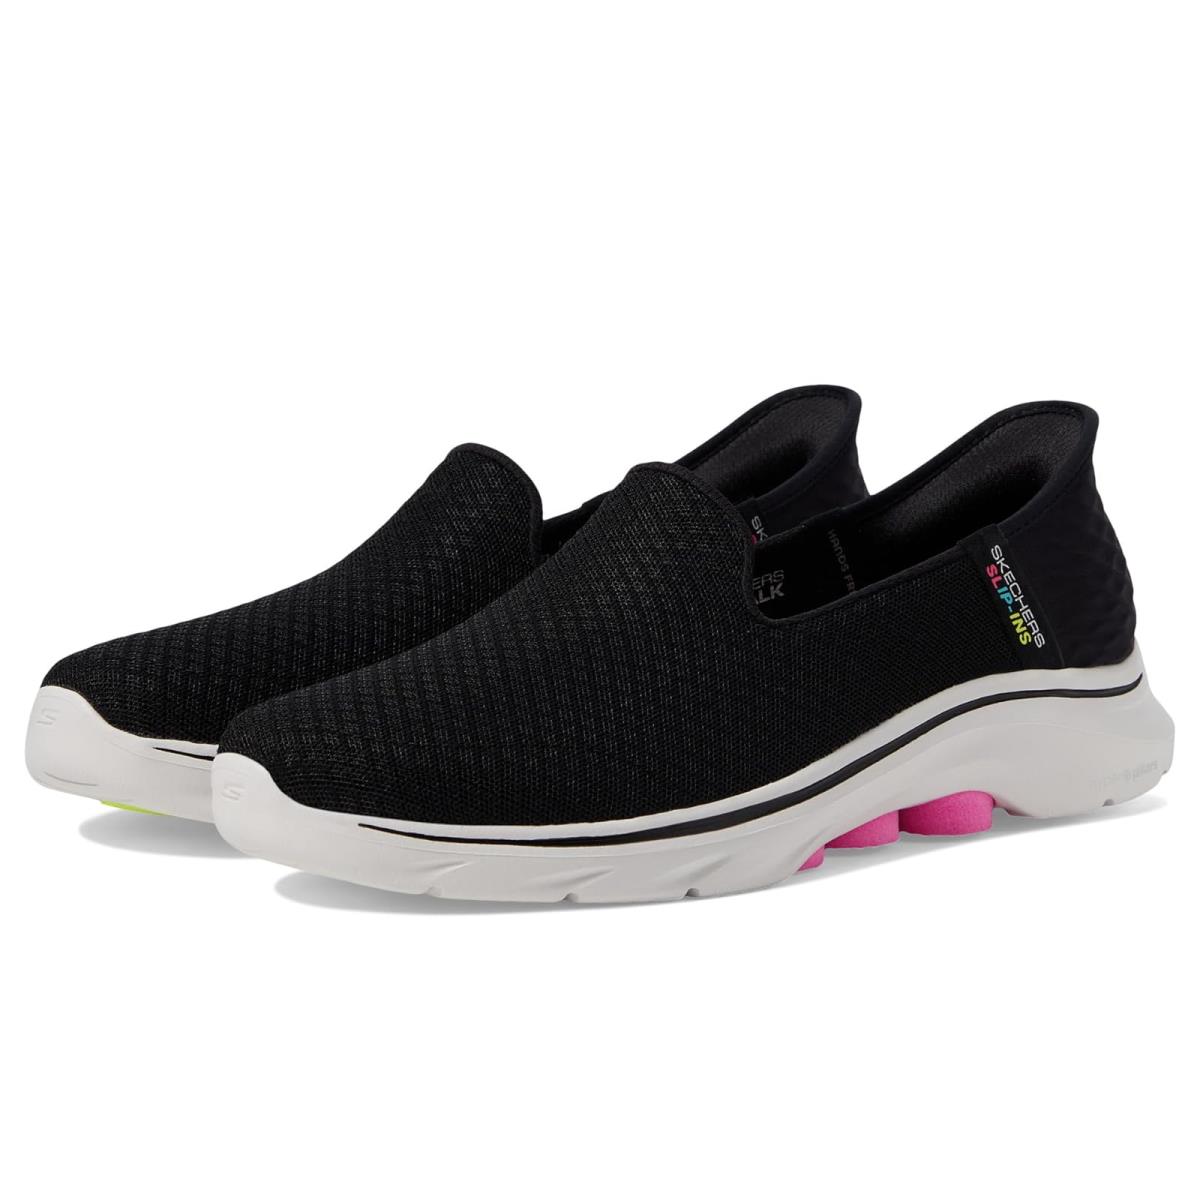 Woman`s Shoes Skechers Performance Go Walk 7 Daley Hands Free Slip-ins Black/Hot Pink